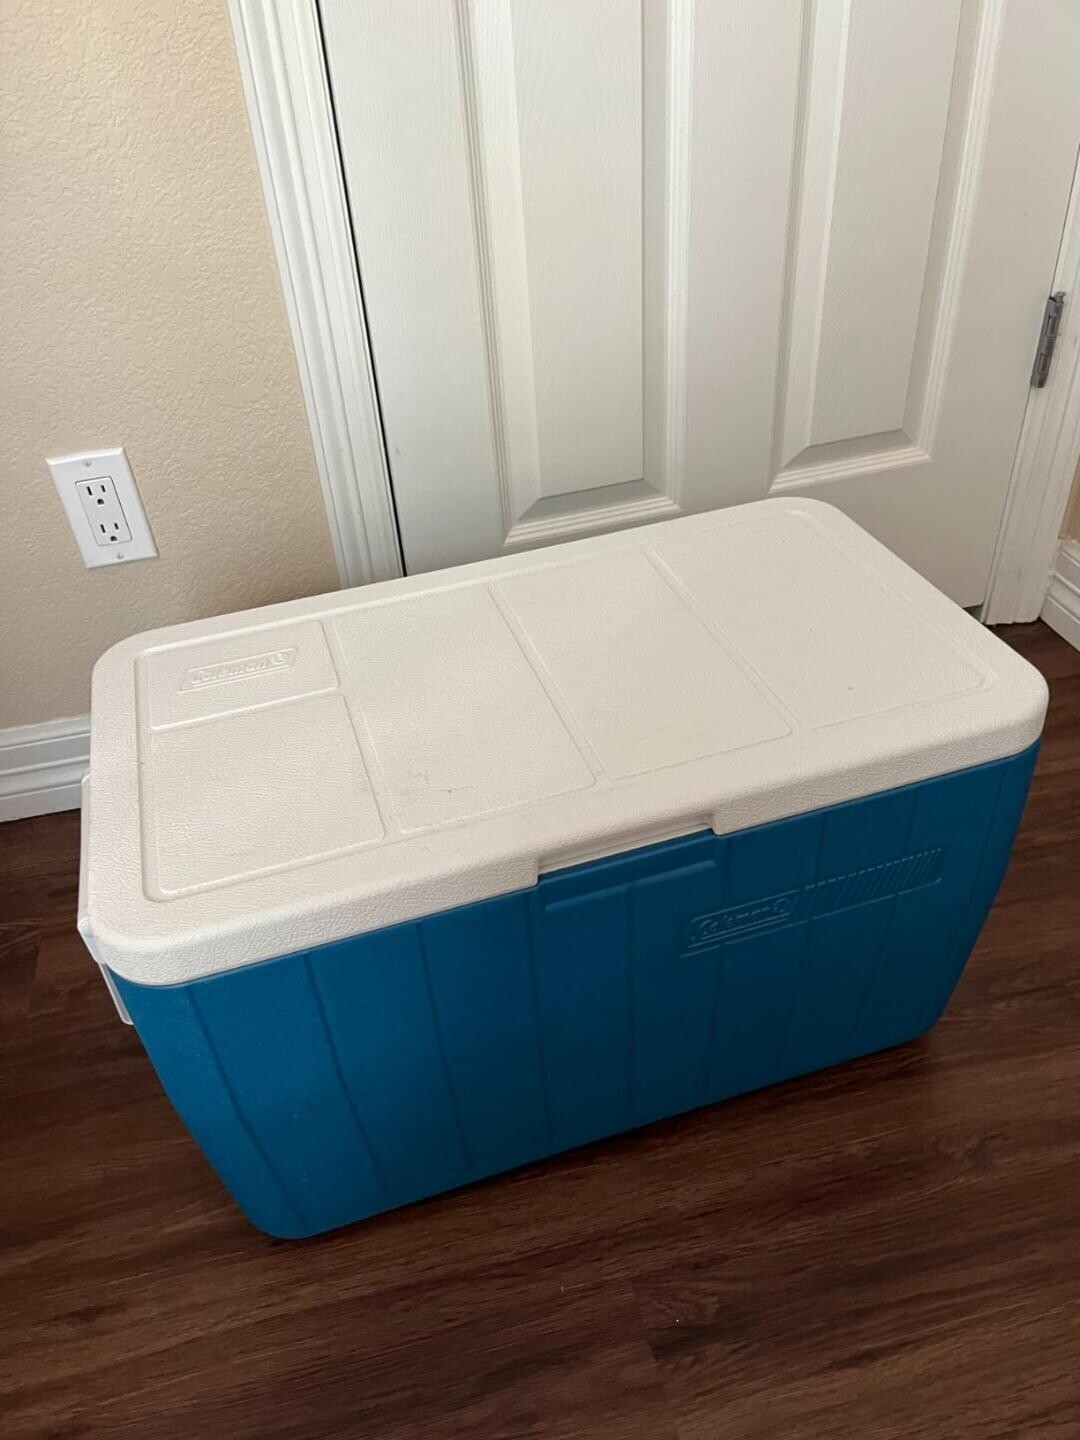 Ultimate Cooling Companion: 48qt Insulated Portable Cooler - Ice Retention Hard Cooler with Robust Heavy-Duty Handles for Unparalleled Refreshment on the Go